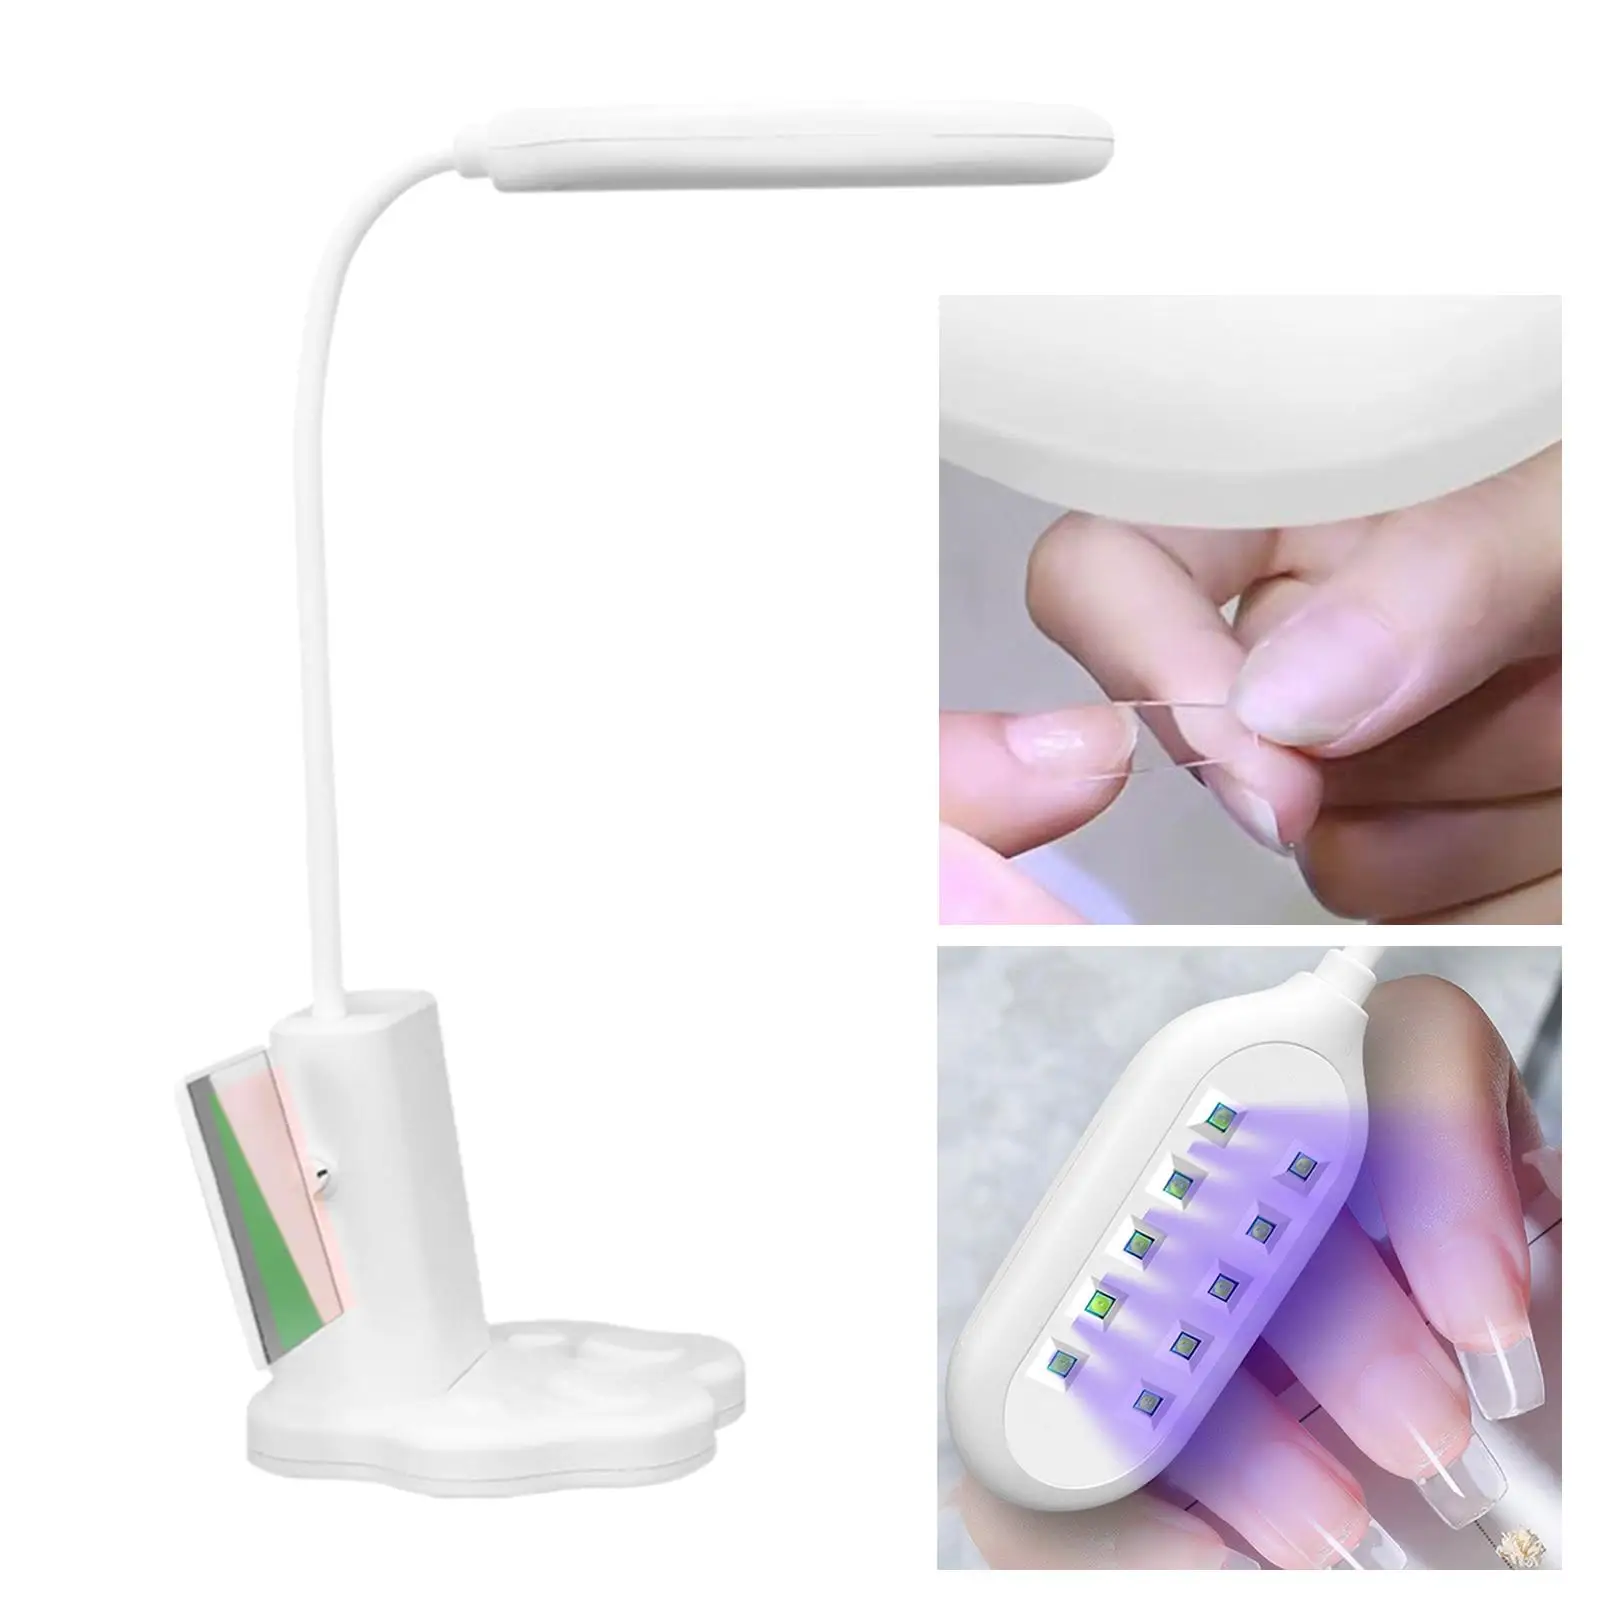  Nail Lamp Portable  Dryer Lamp 10 LEDs  Curing Lamp 30 Nail Polish Drying Machine Rechargeable